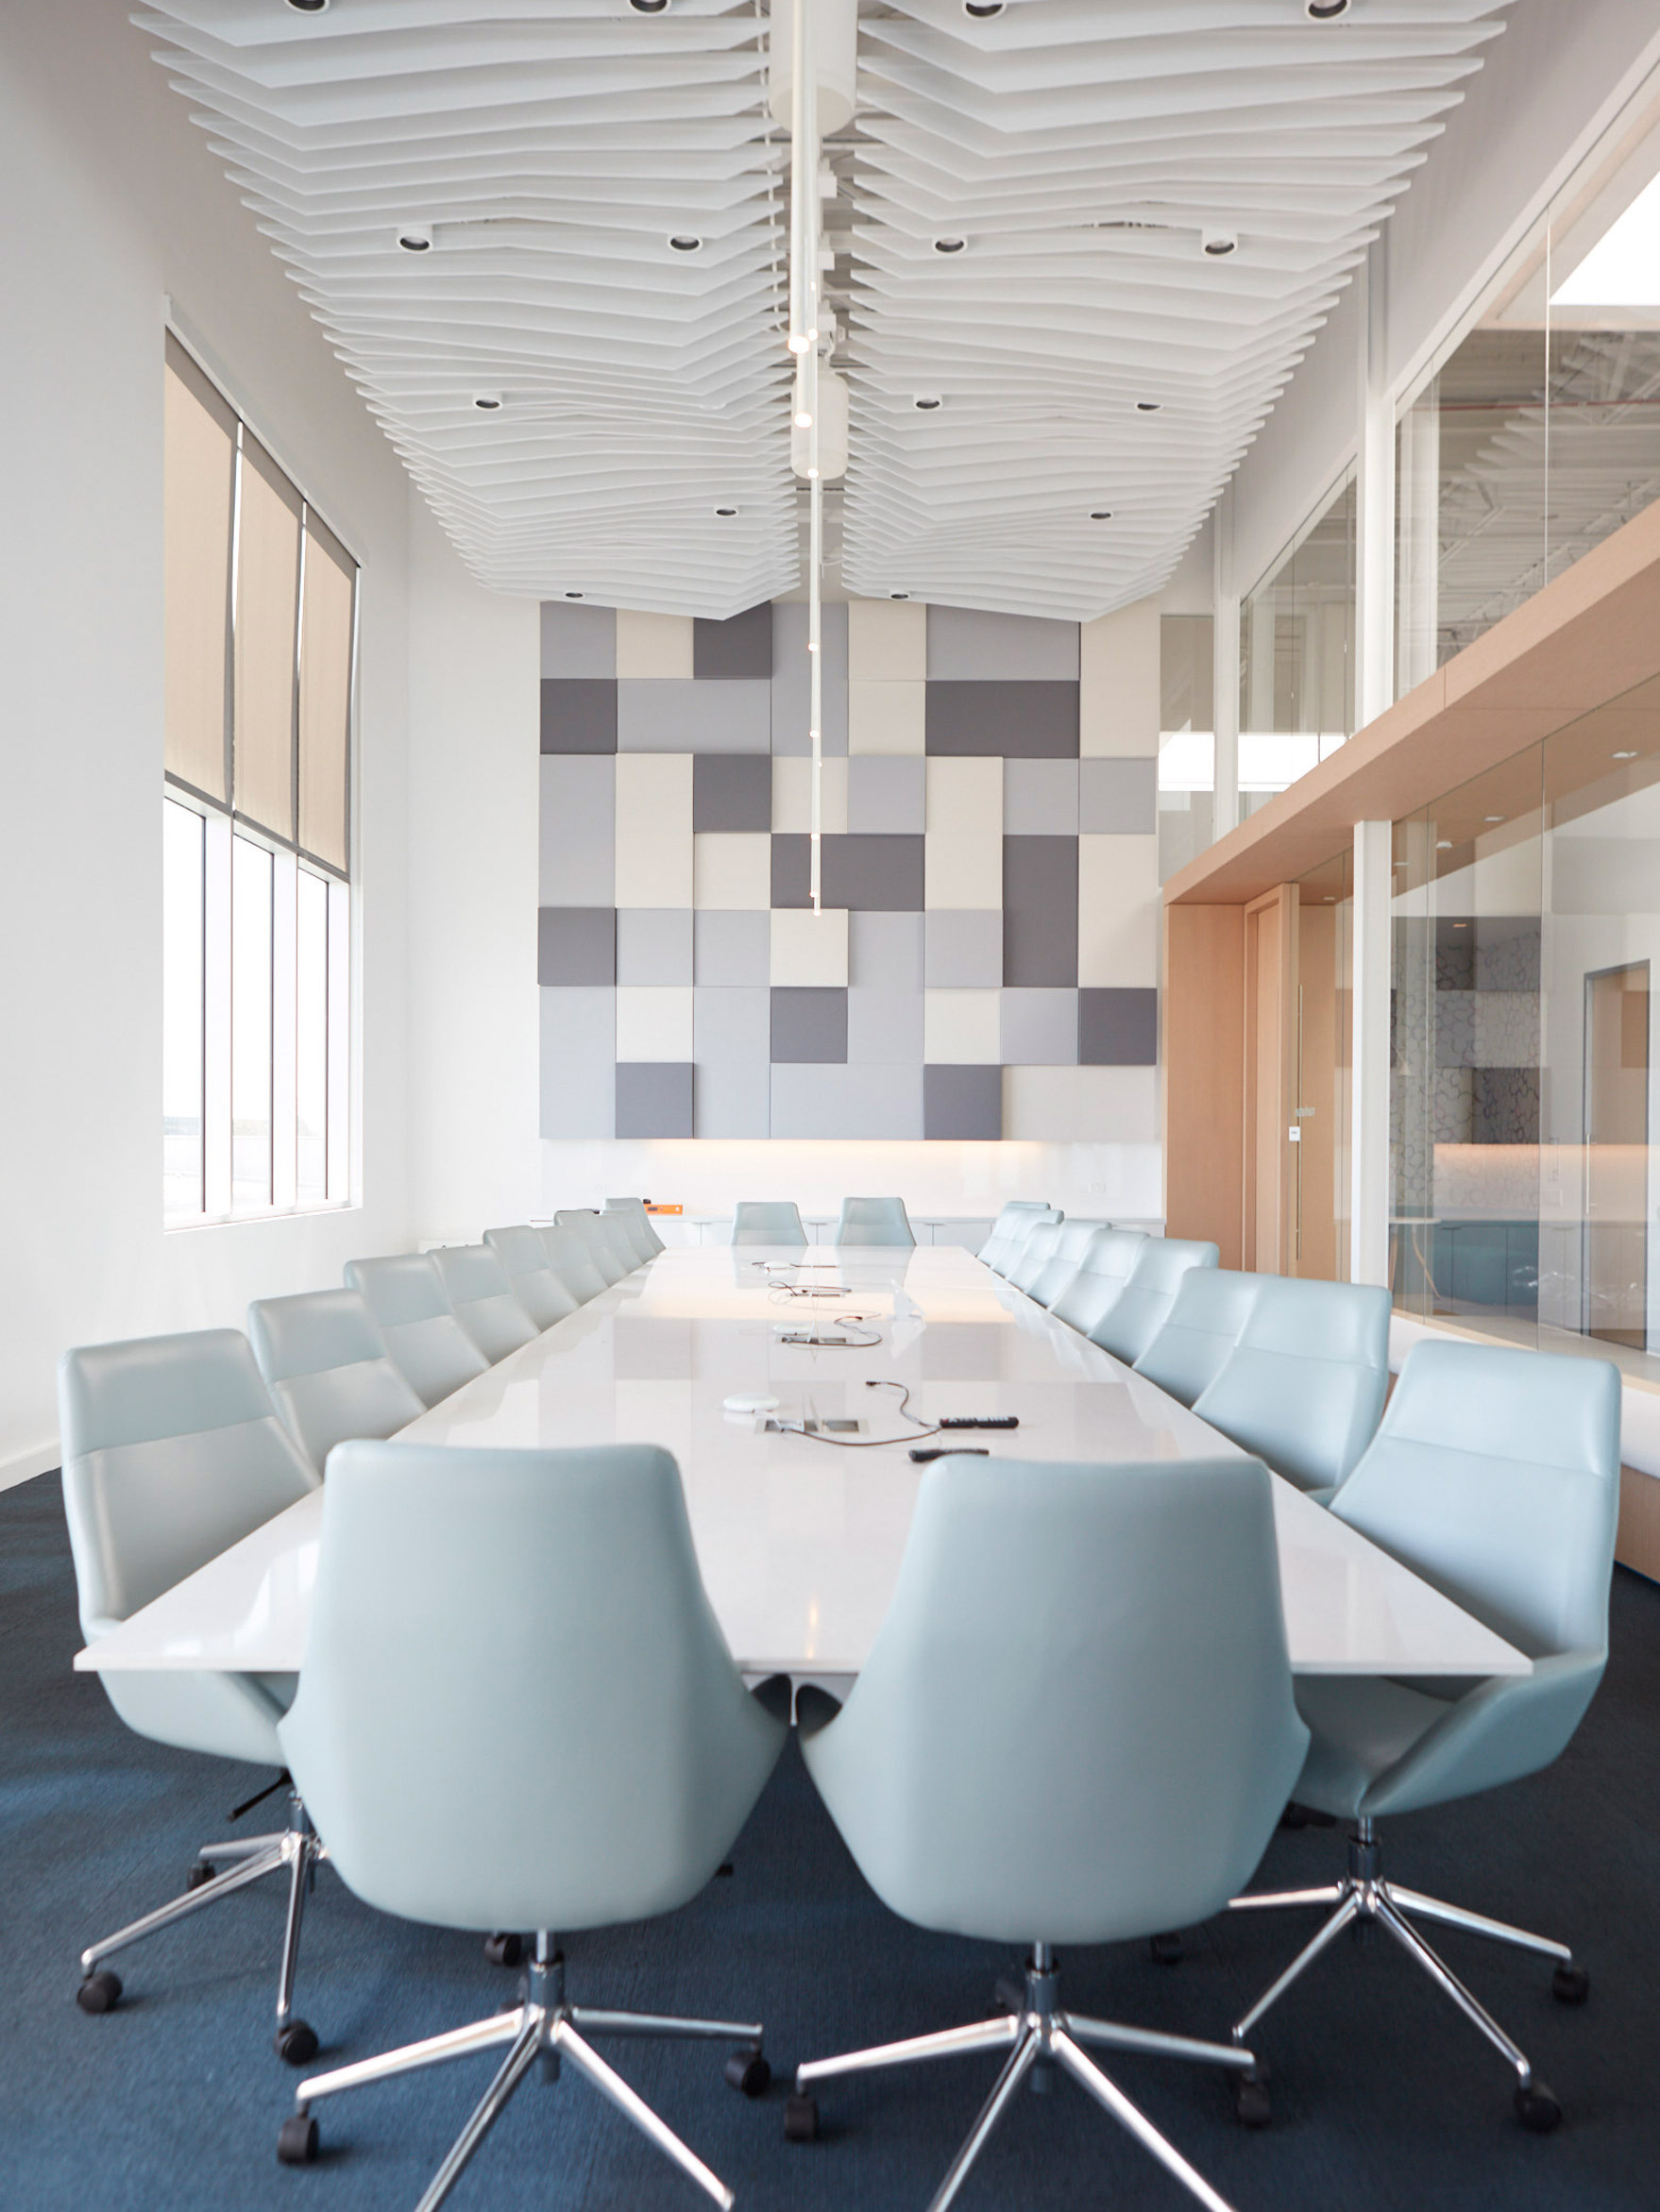 Modern conference room featuring a long white table with rounded edges surrounded by ergonomic aqua chairs. The space is defined by a geometric gray and white wall mosaic and a sculptural ceiling with dynamic wave patterns enhancing the room's acoustic qualities. Natural light filters through ample windows.